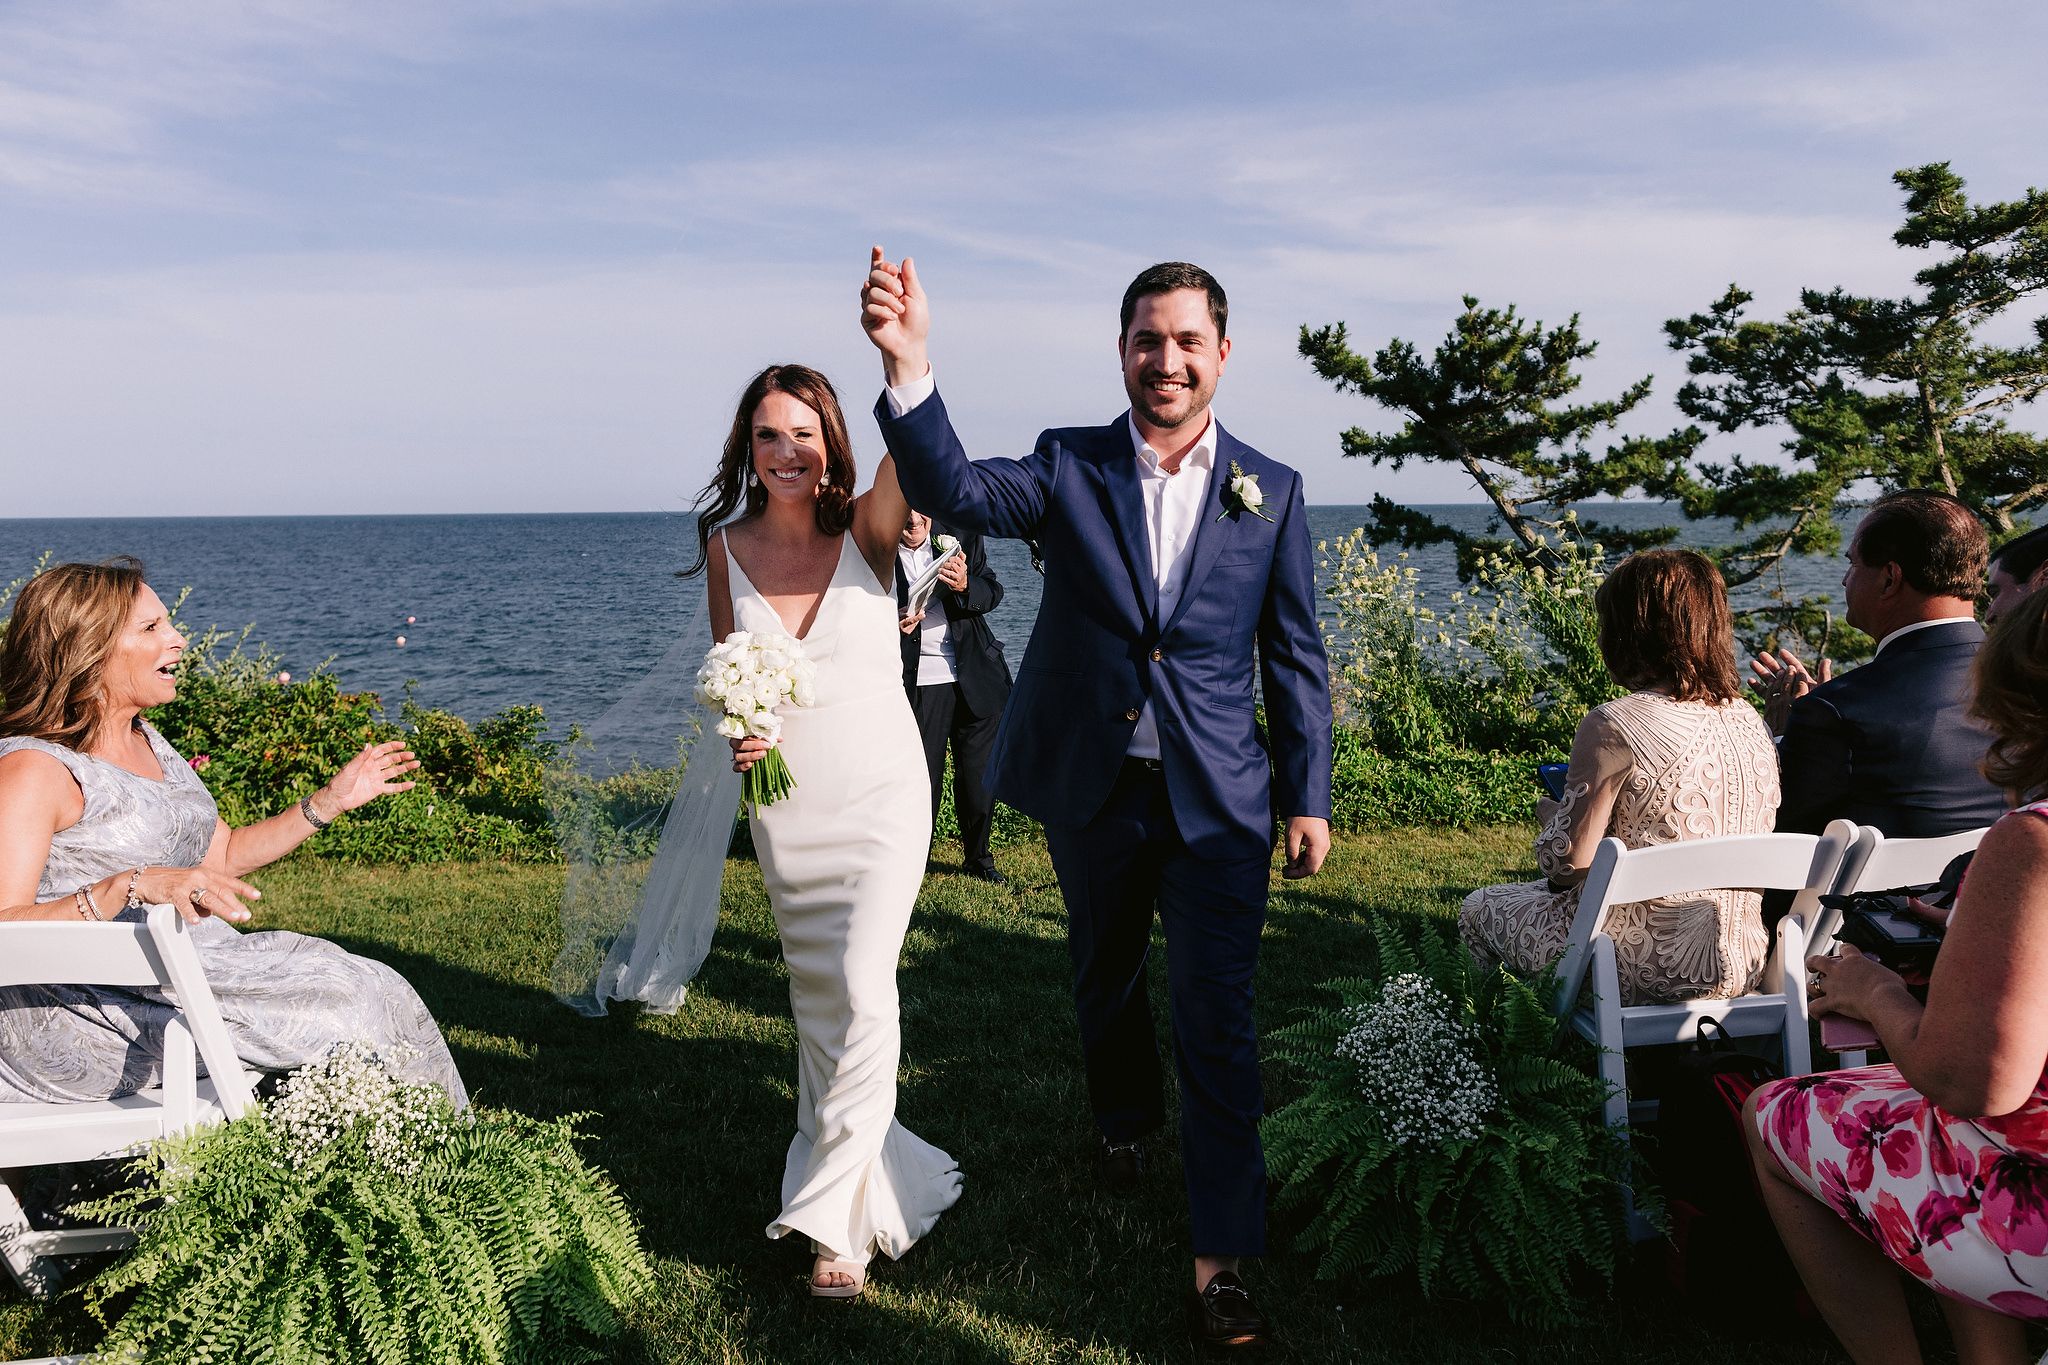 The bride and groom are happily walking away in the aisle after saying their vows. Wianno Club, Cape Cod, Osterville, MA. Beach wedding venue image by Jenny Fu Studio